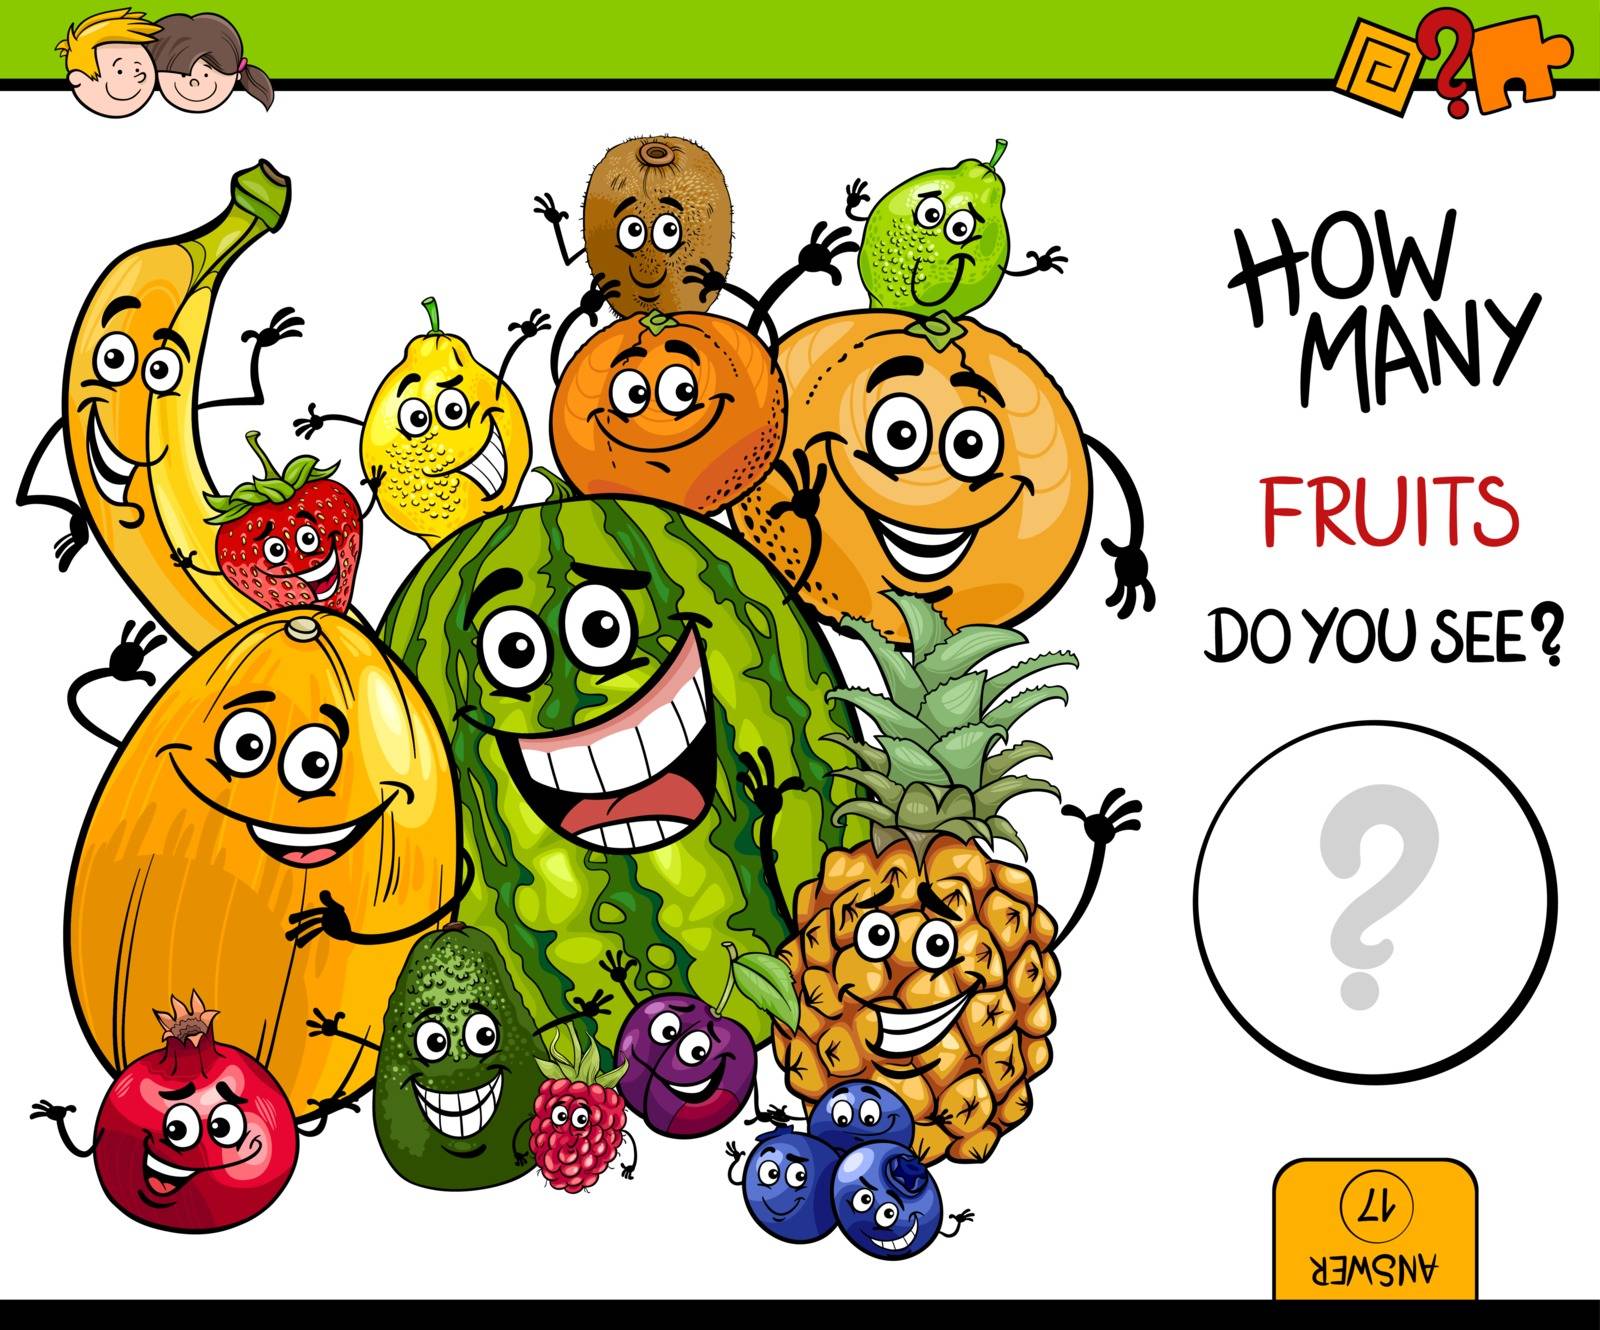 Cartoon Illustration of Educational Counting Activity for Children with Fruit Characters Group